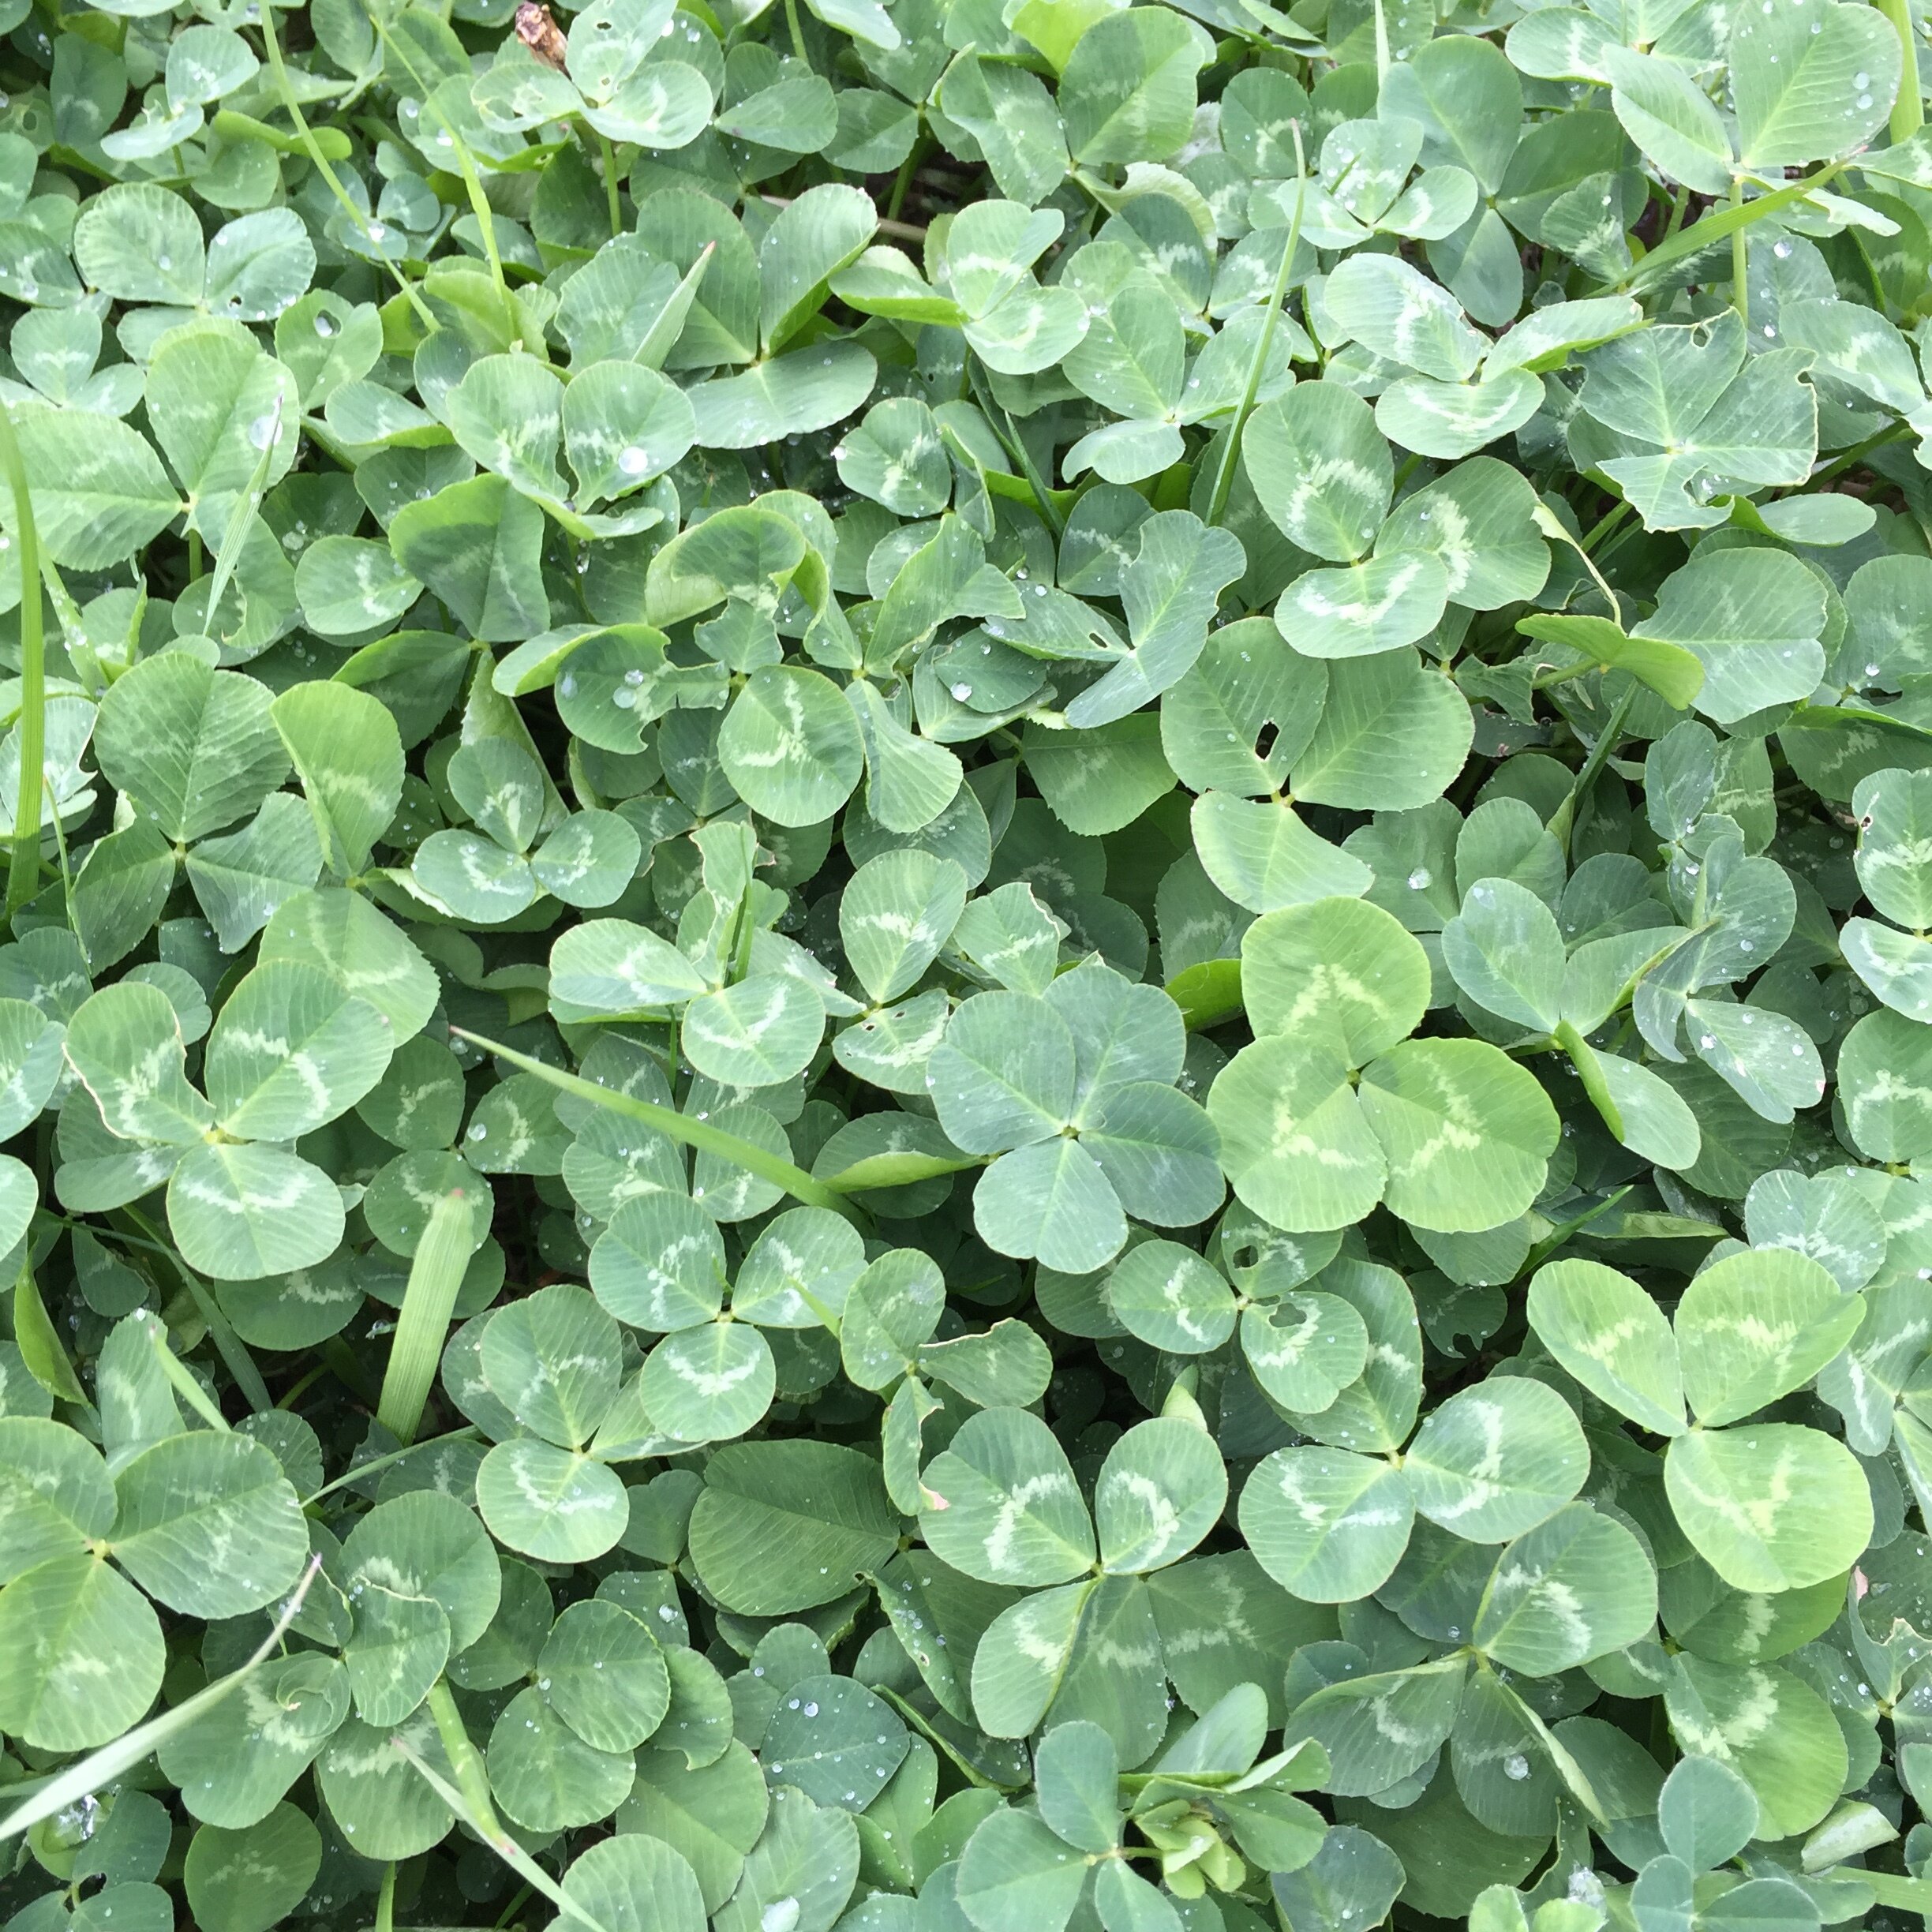 Debunking the History and Mystery Behind the Four-Leaf Clover